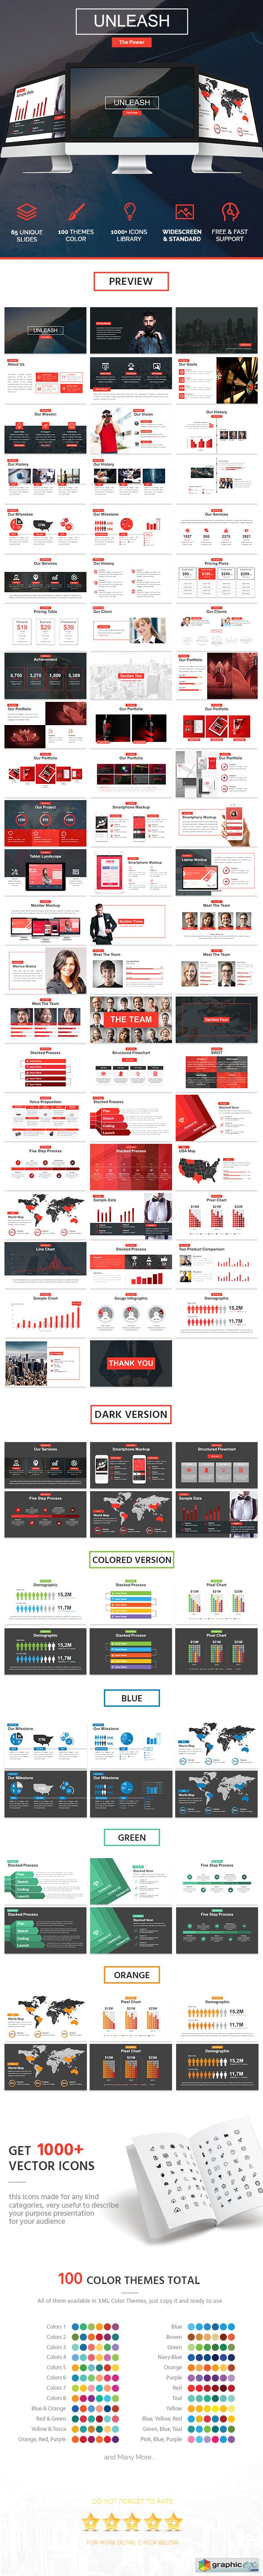 Unleash Powerpoint Template - Relase the Power!